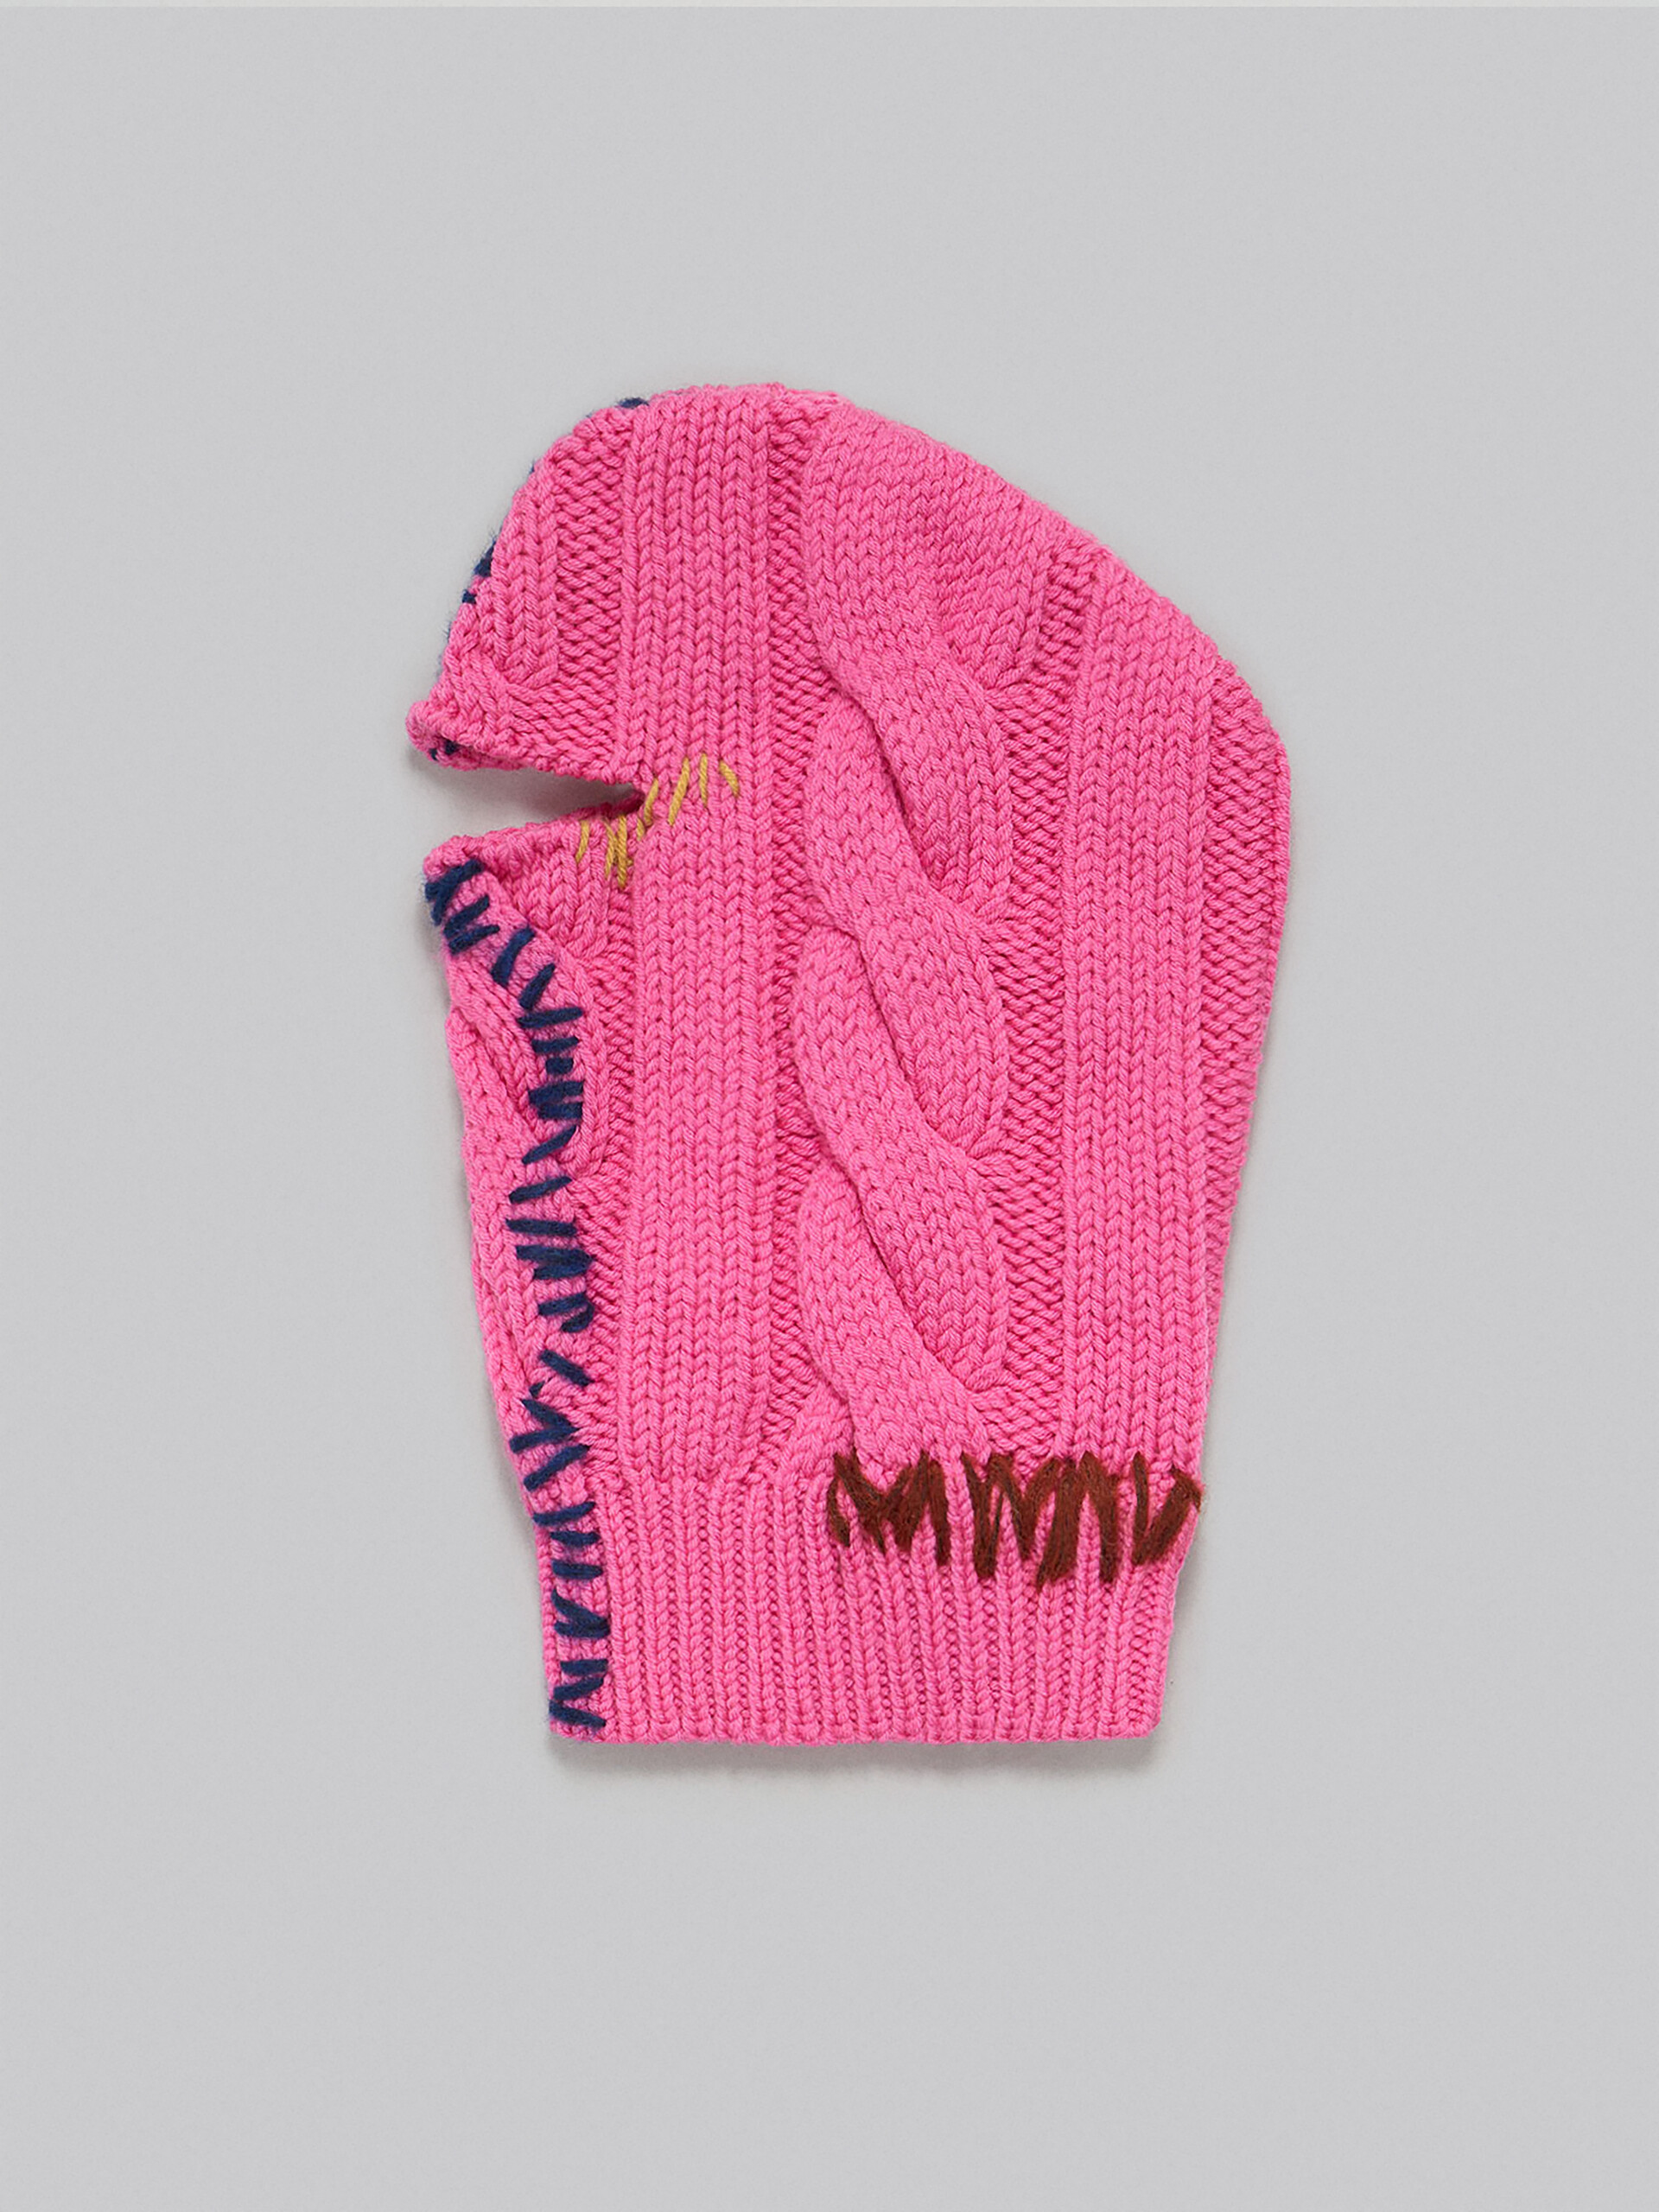 Fuchsia wool balaclava with contrasting mending - Other accessories - Image 2